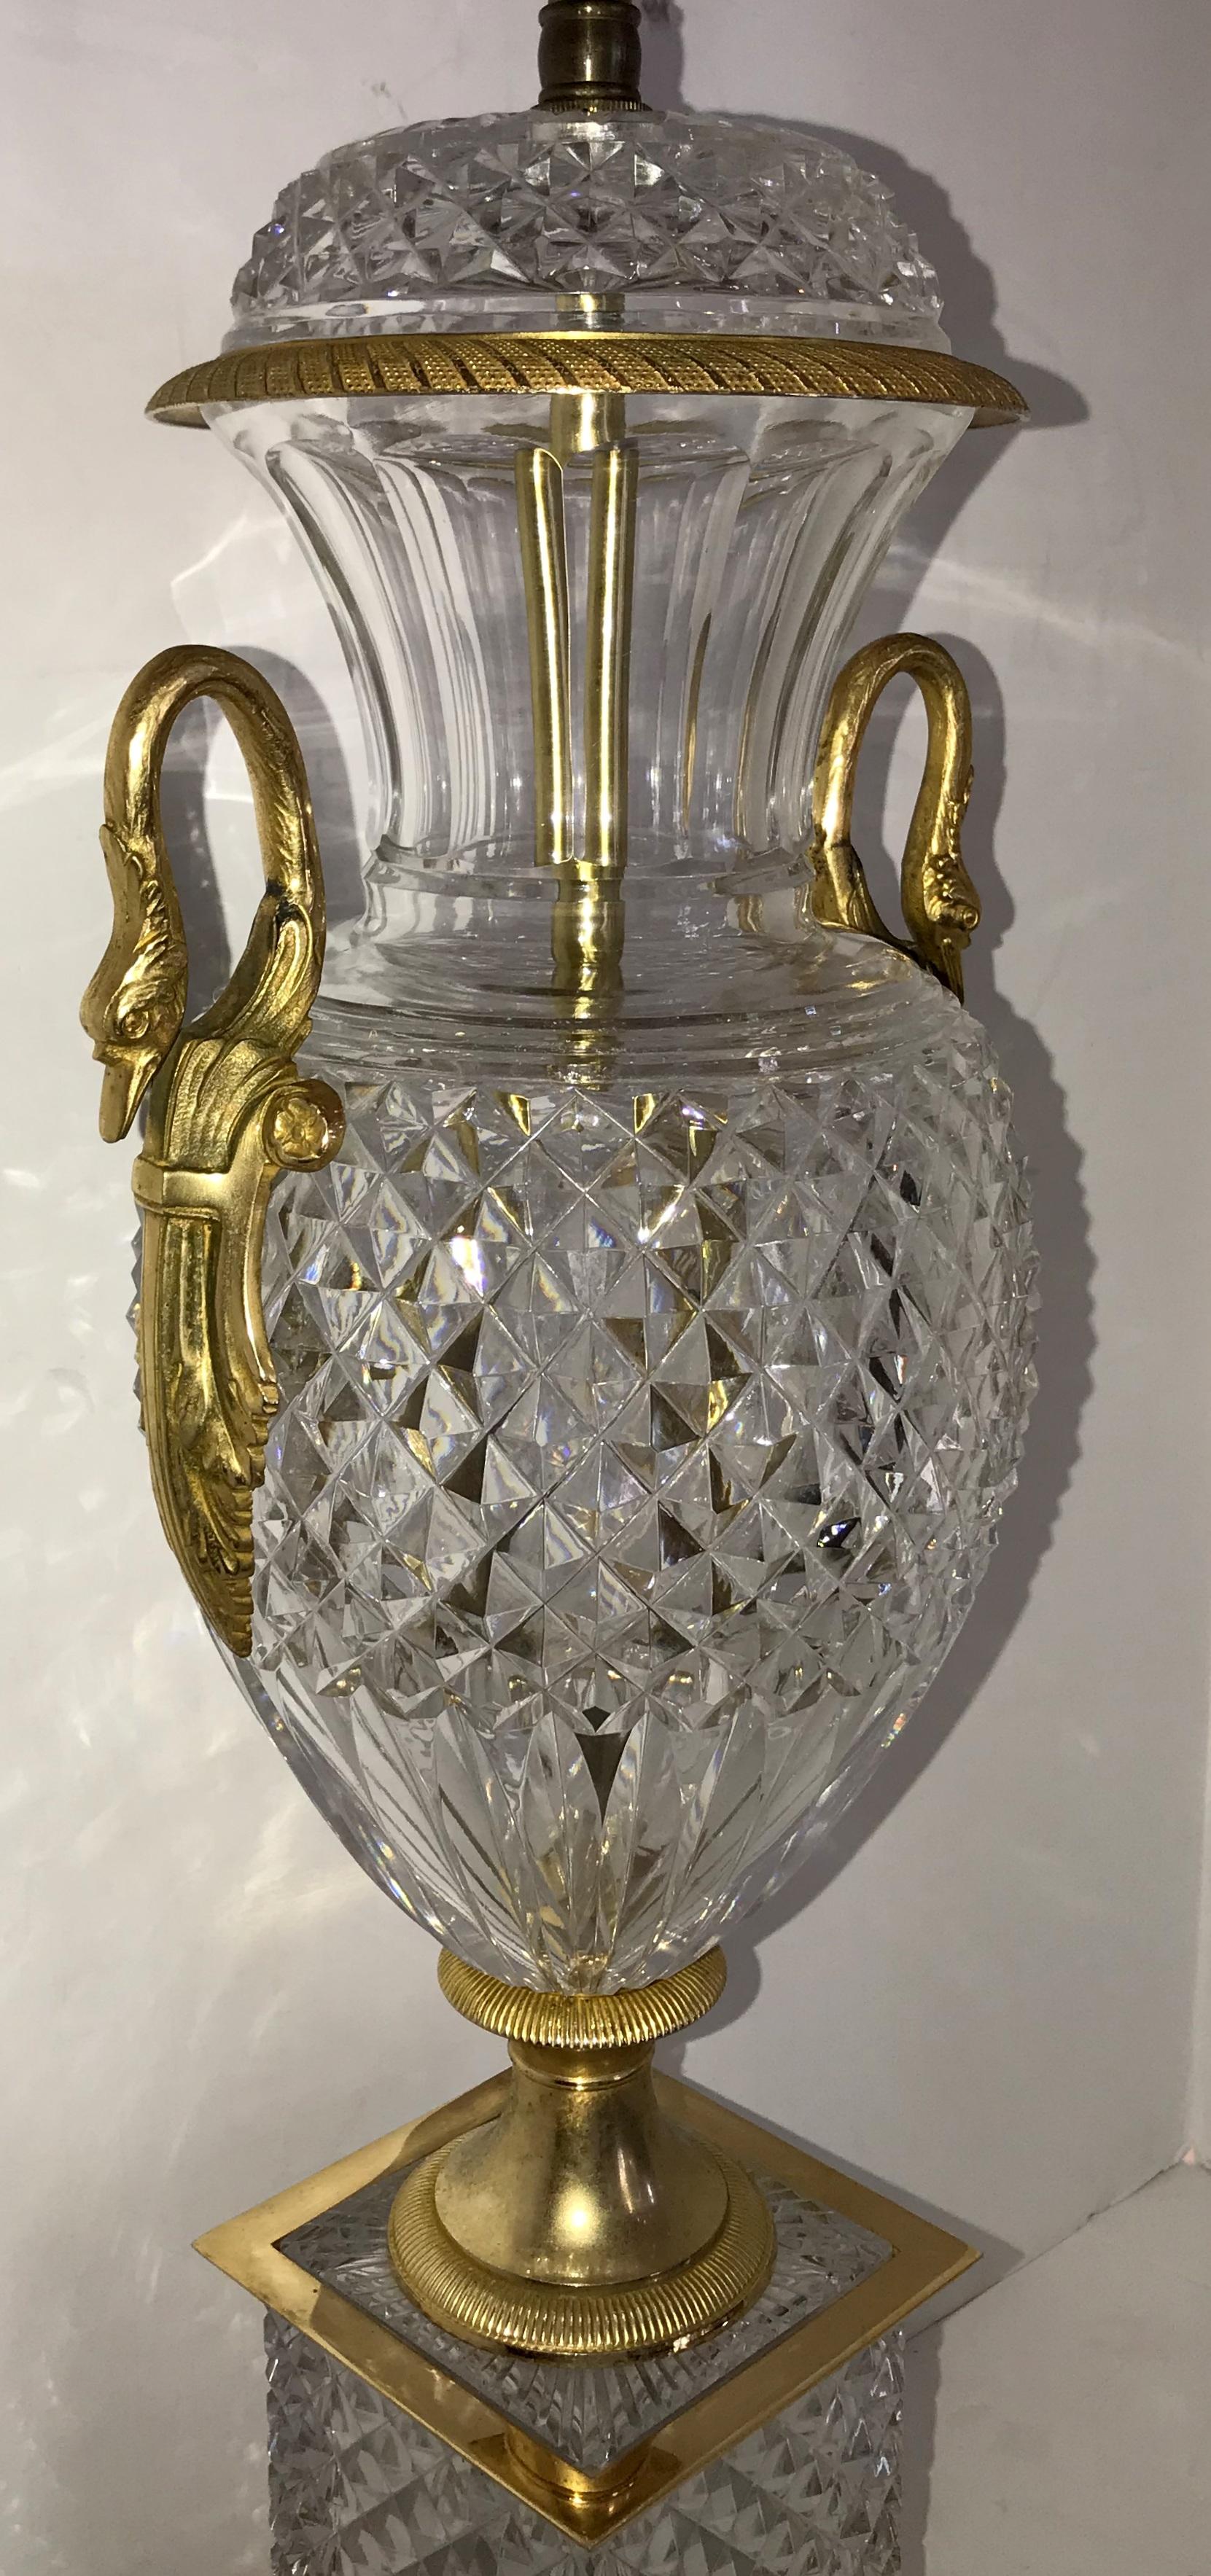 20th Century Pair of French Neoclassical Cut Crystal Urn Bronze Swan Ormolu Handles Lamps For Sale